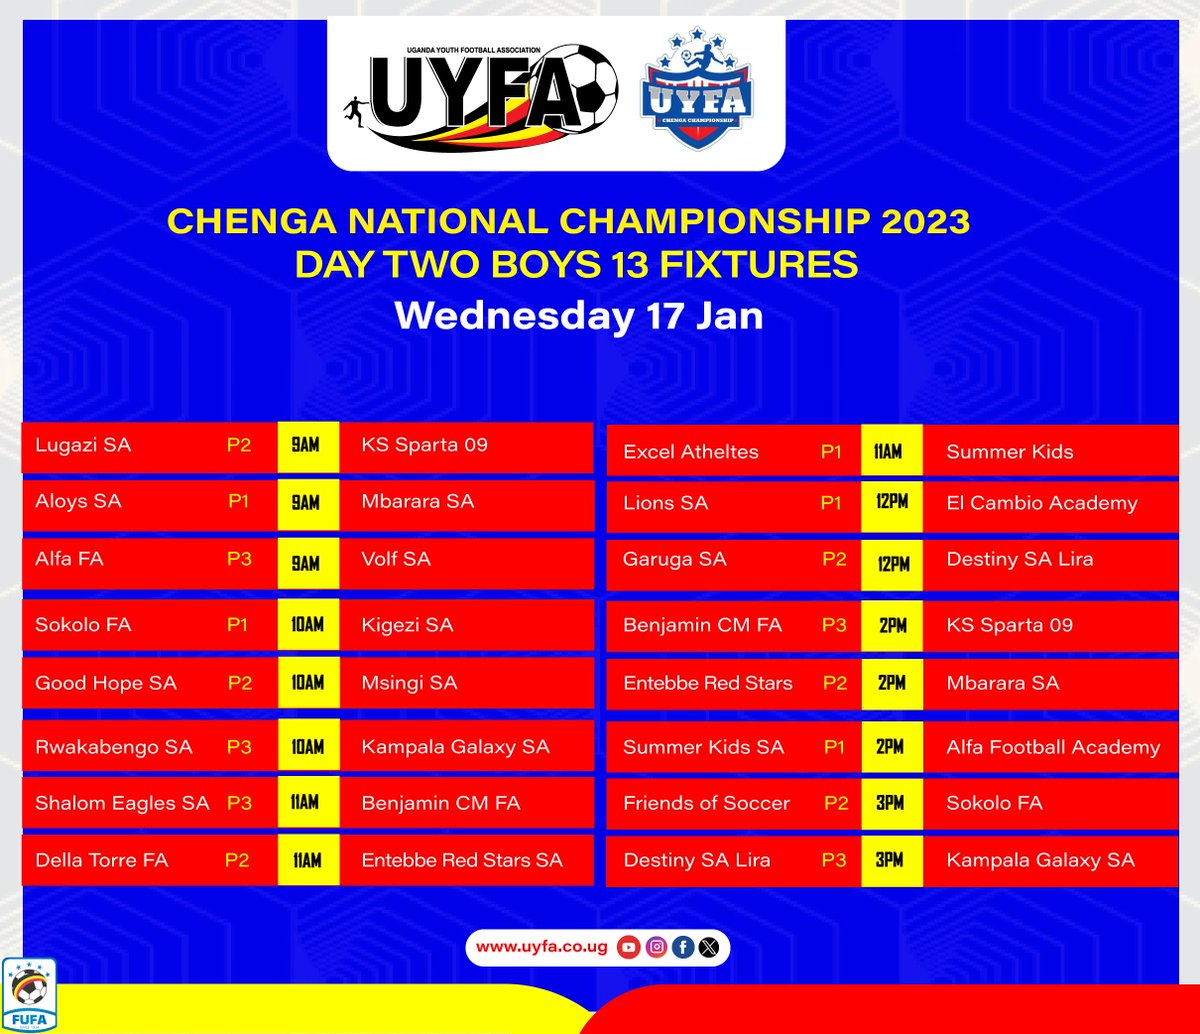 Day Two Fixtures of the @UYFA9 Chenga National Championship